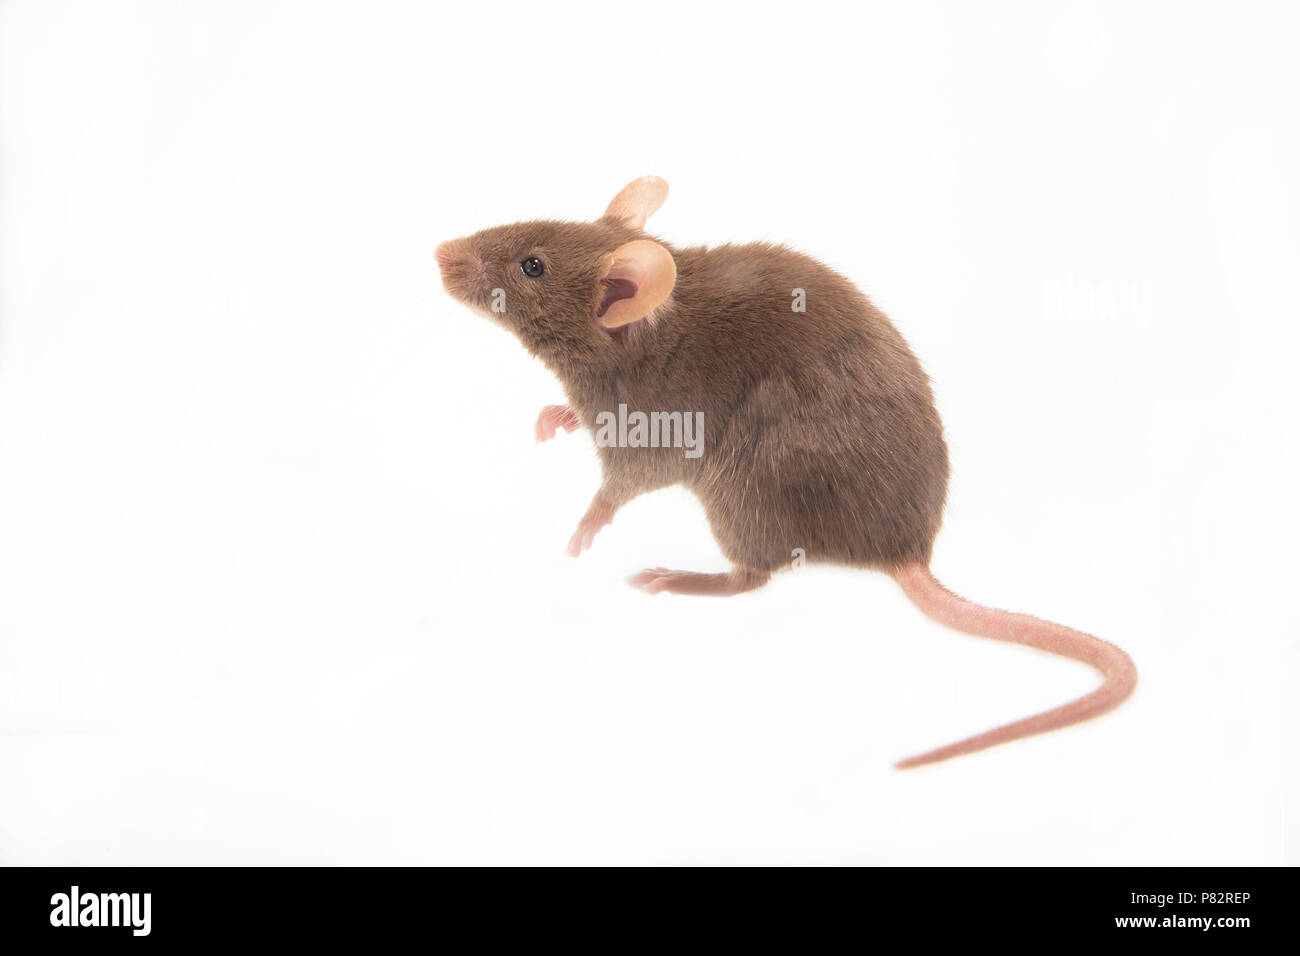 Huismuis, House Mouse Mus musculus Foto Stock